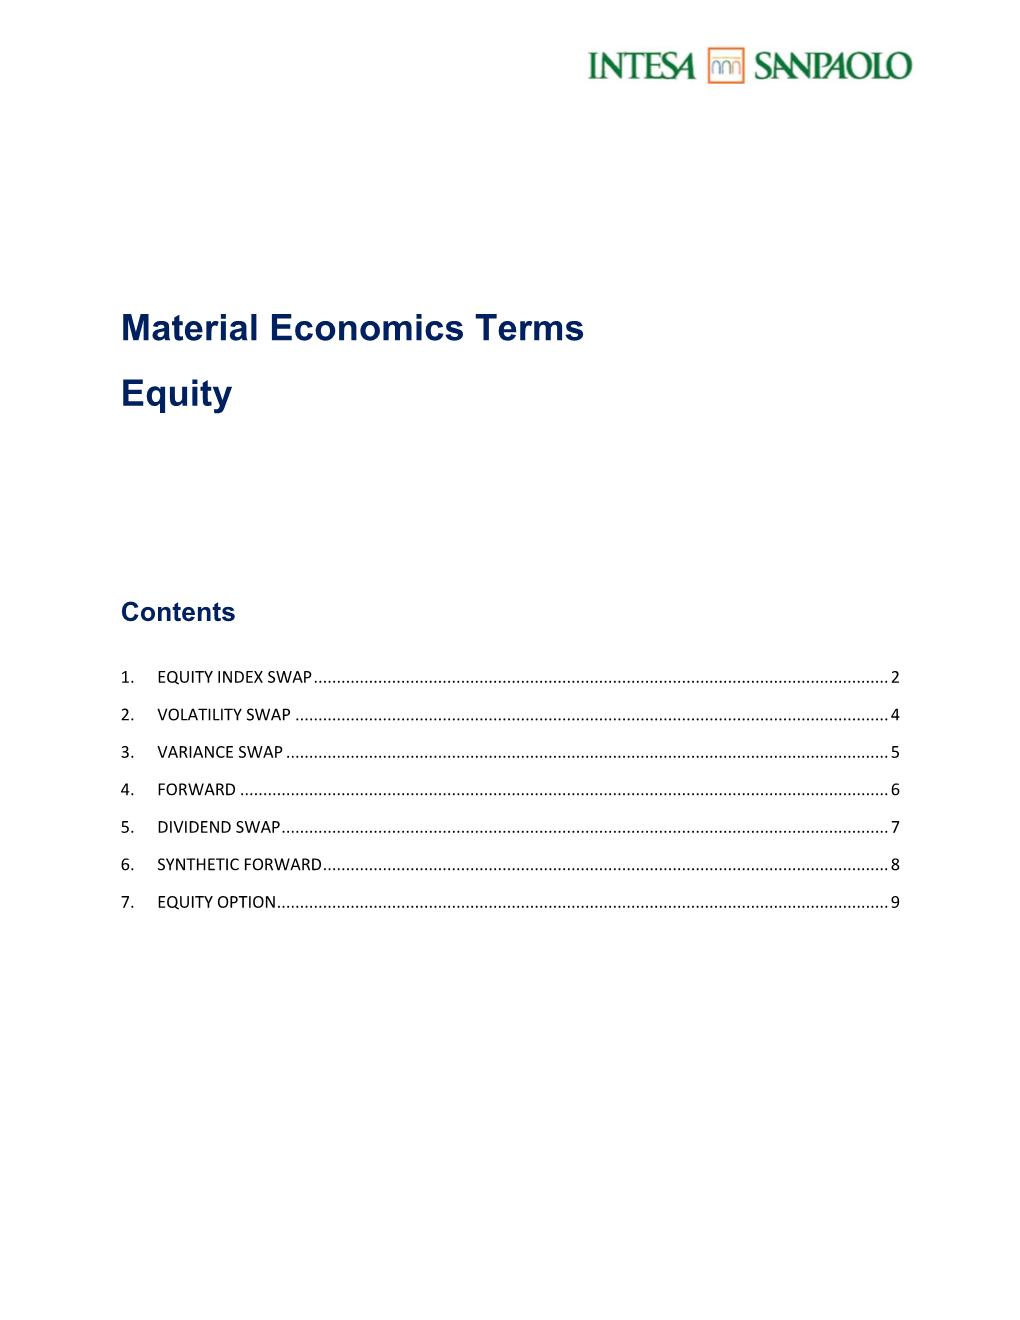 4.4.2 Equity Derivatives Material Economic Terms (Pdf)